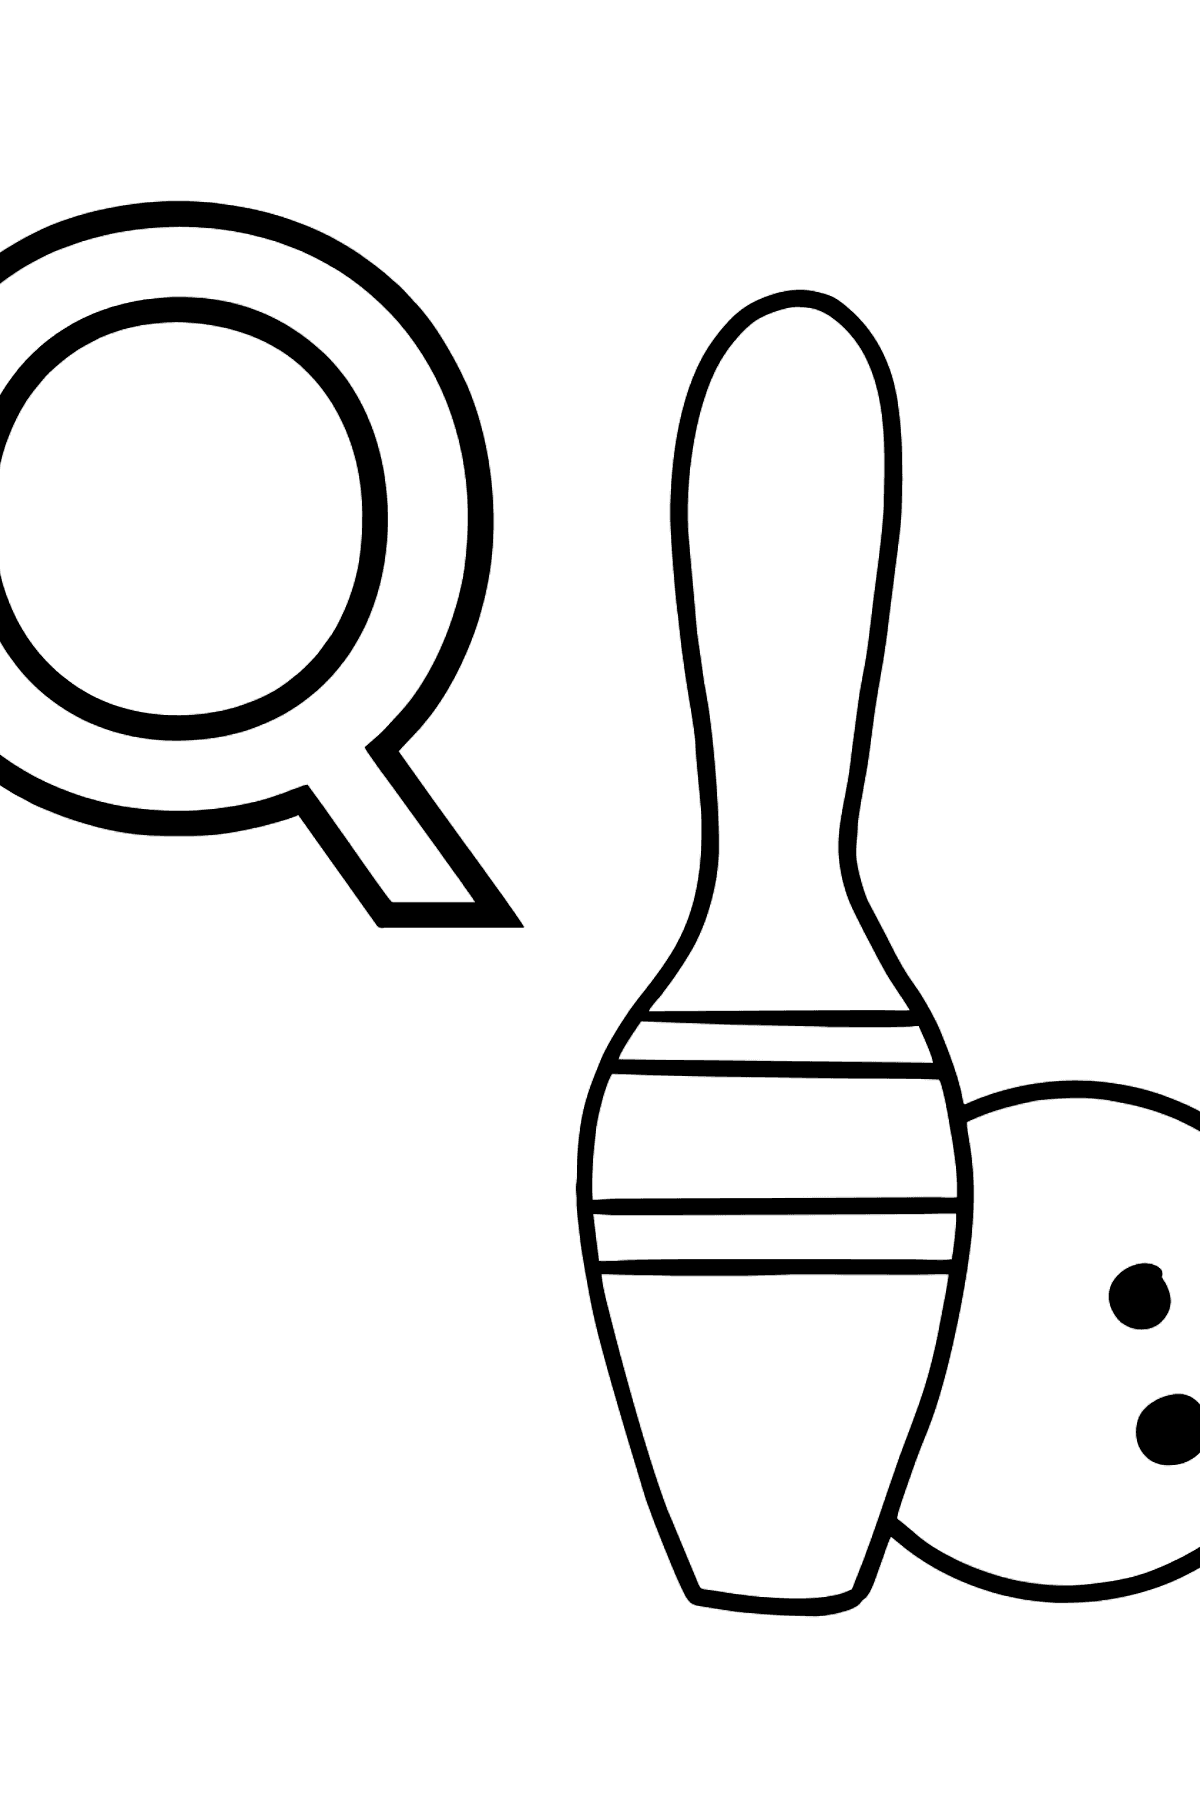 French Letter Q coloring pages - QUILLE - Coloring Pages for Kids